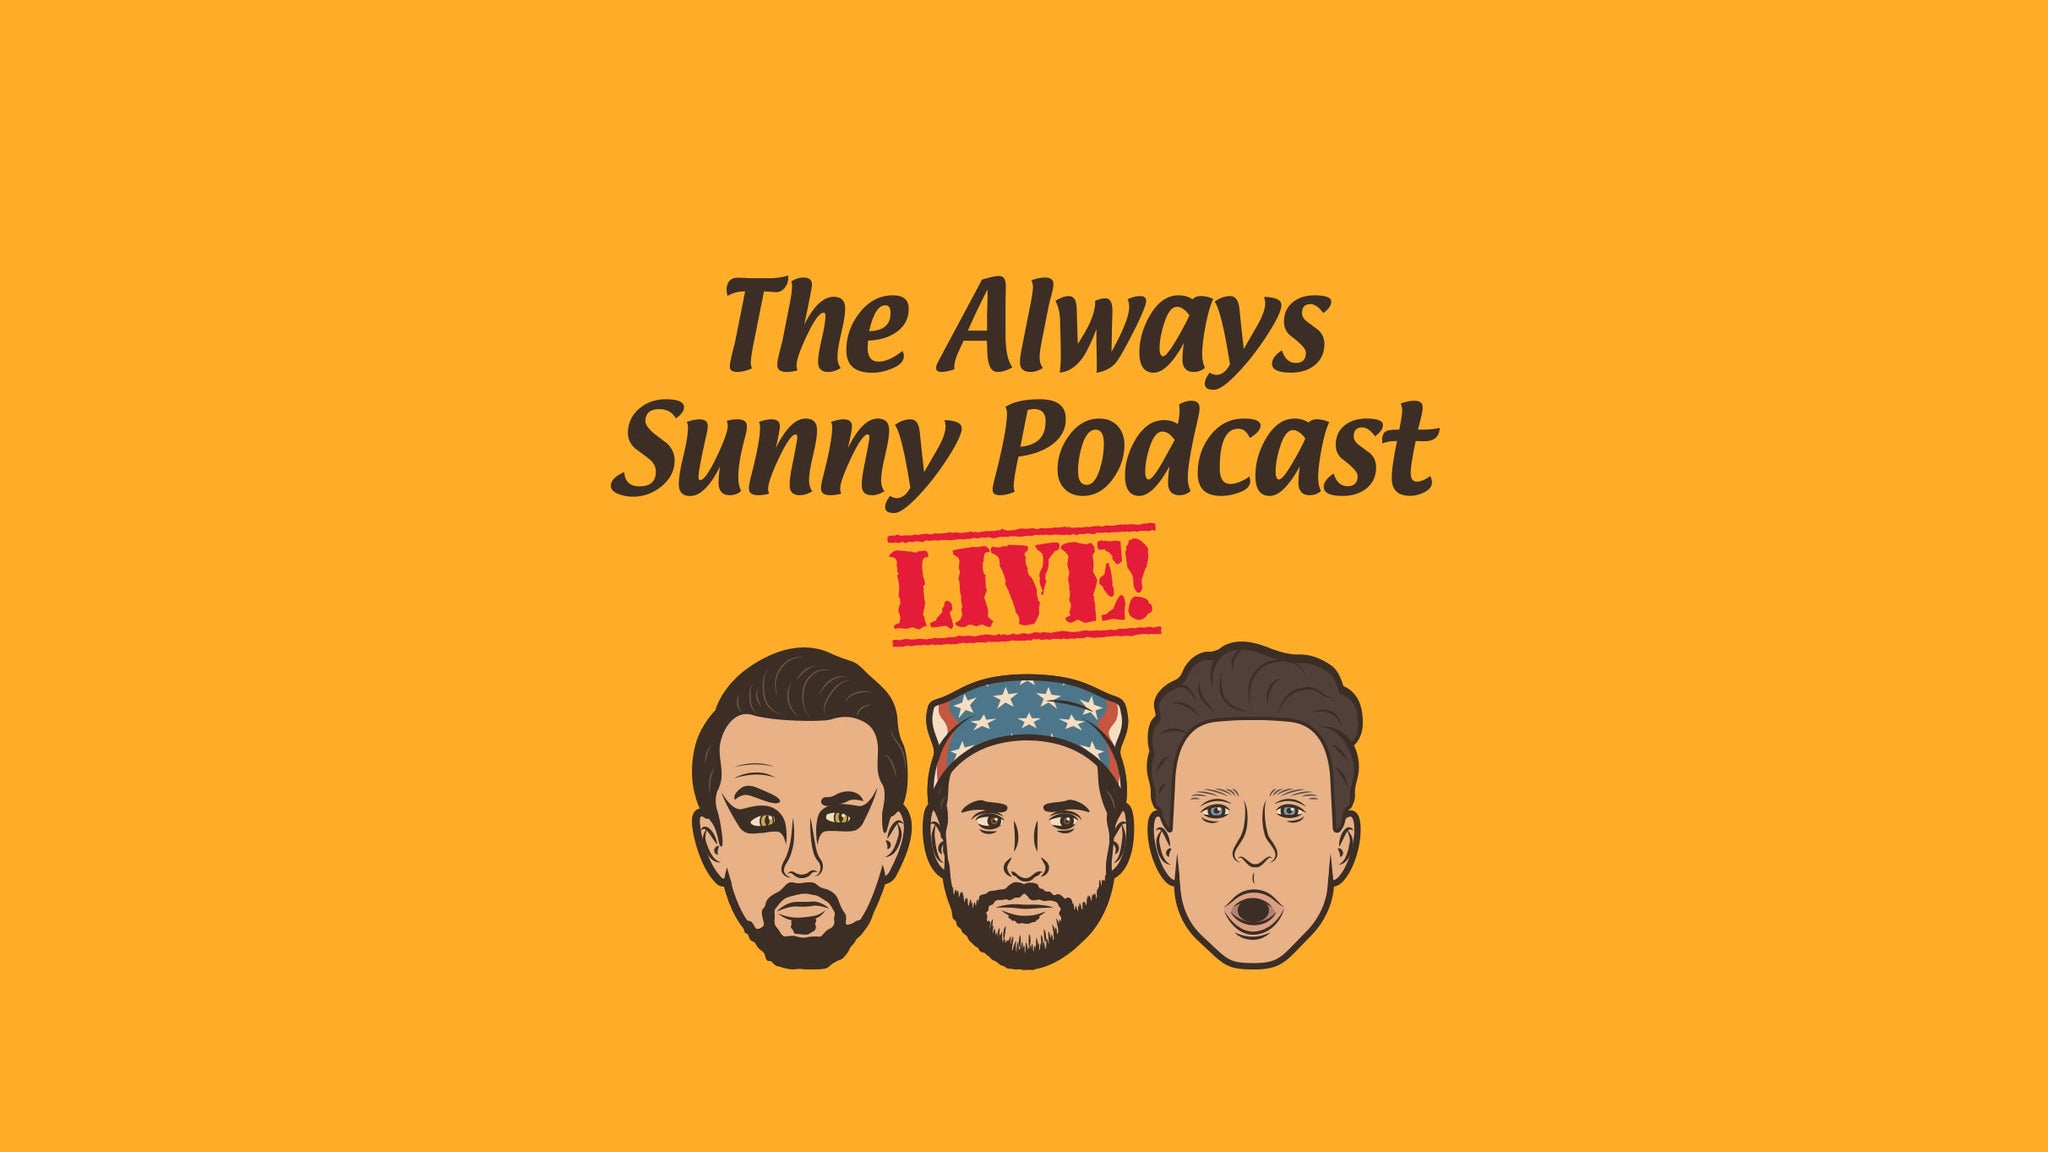 Four Walls Presents The Always Sunny Podcast LIVE! in New York promo photo for Chase Cardmember Preferred Seating presale offer code